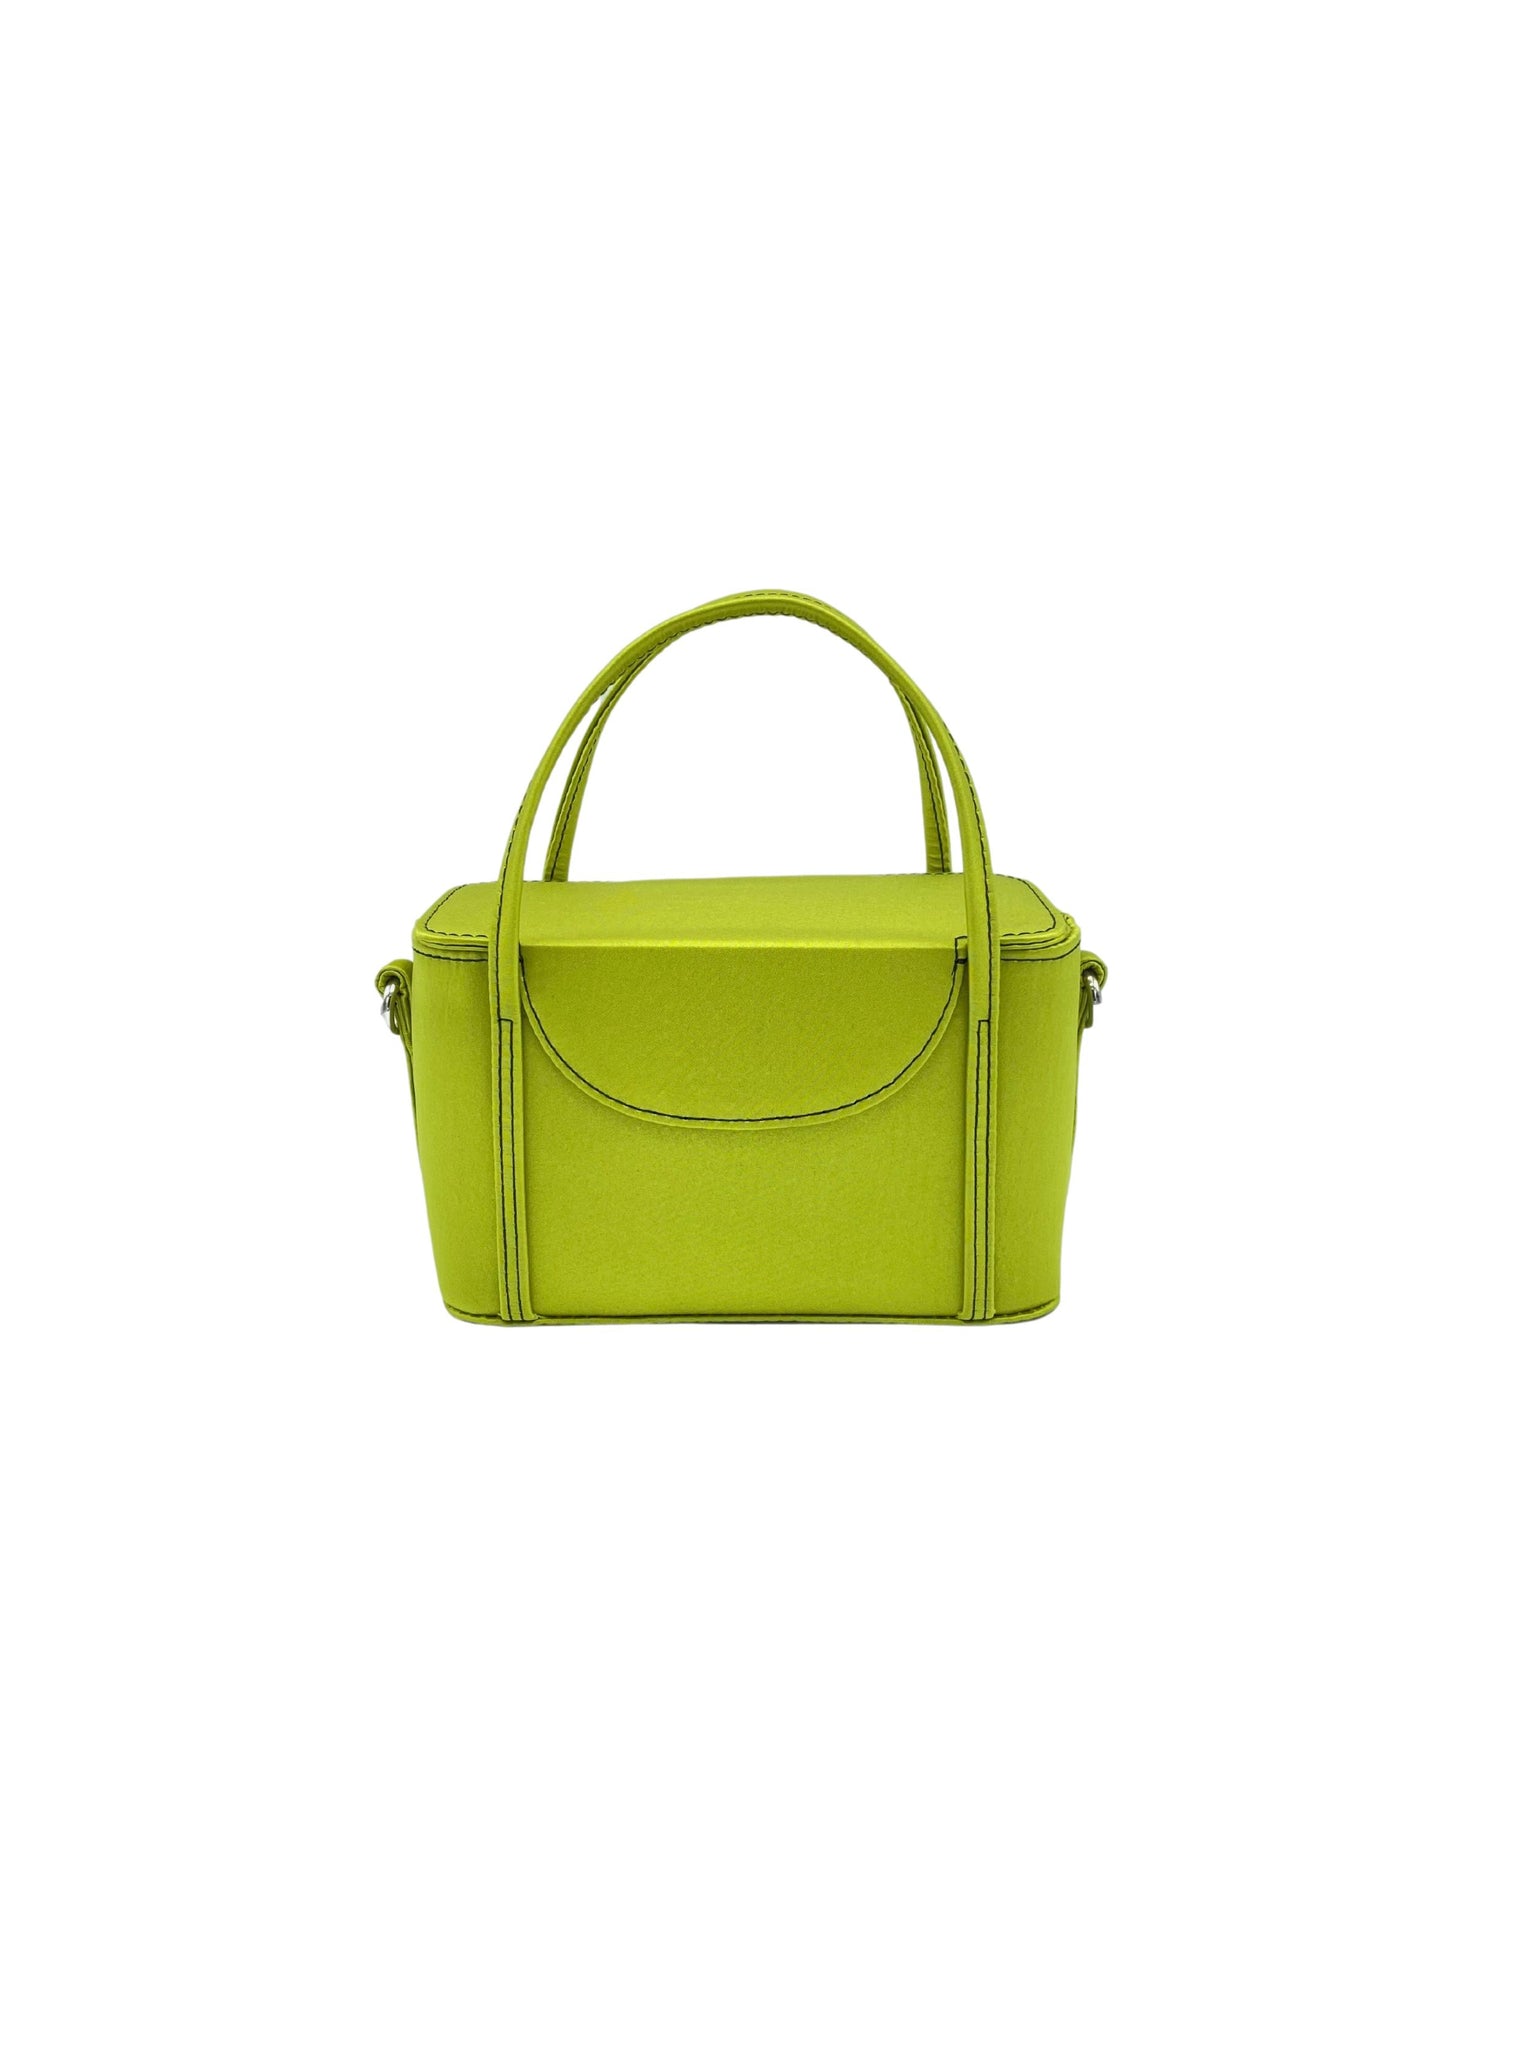 Grace Case in Chartreuse Satin with Black Contrast Stitching - For the Ages